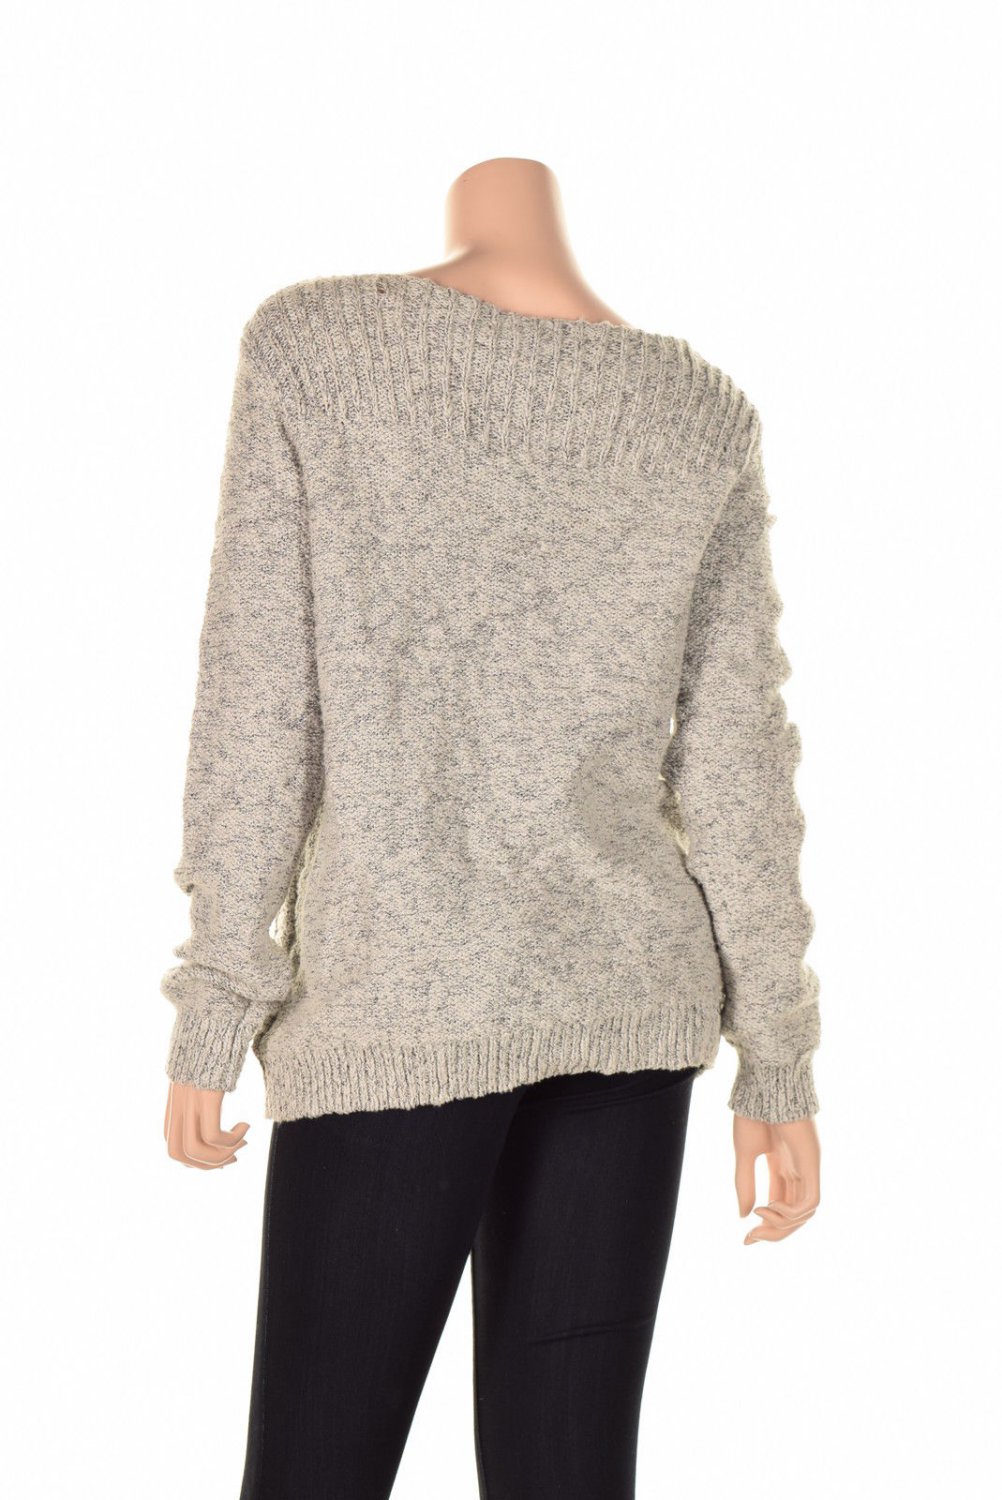 Jones New York Ribbed Cable Knit Sweater Silver Foxblack L (Size) Women'S